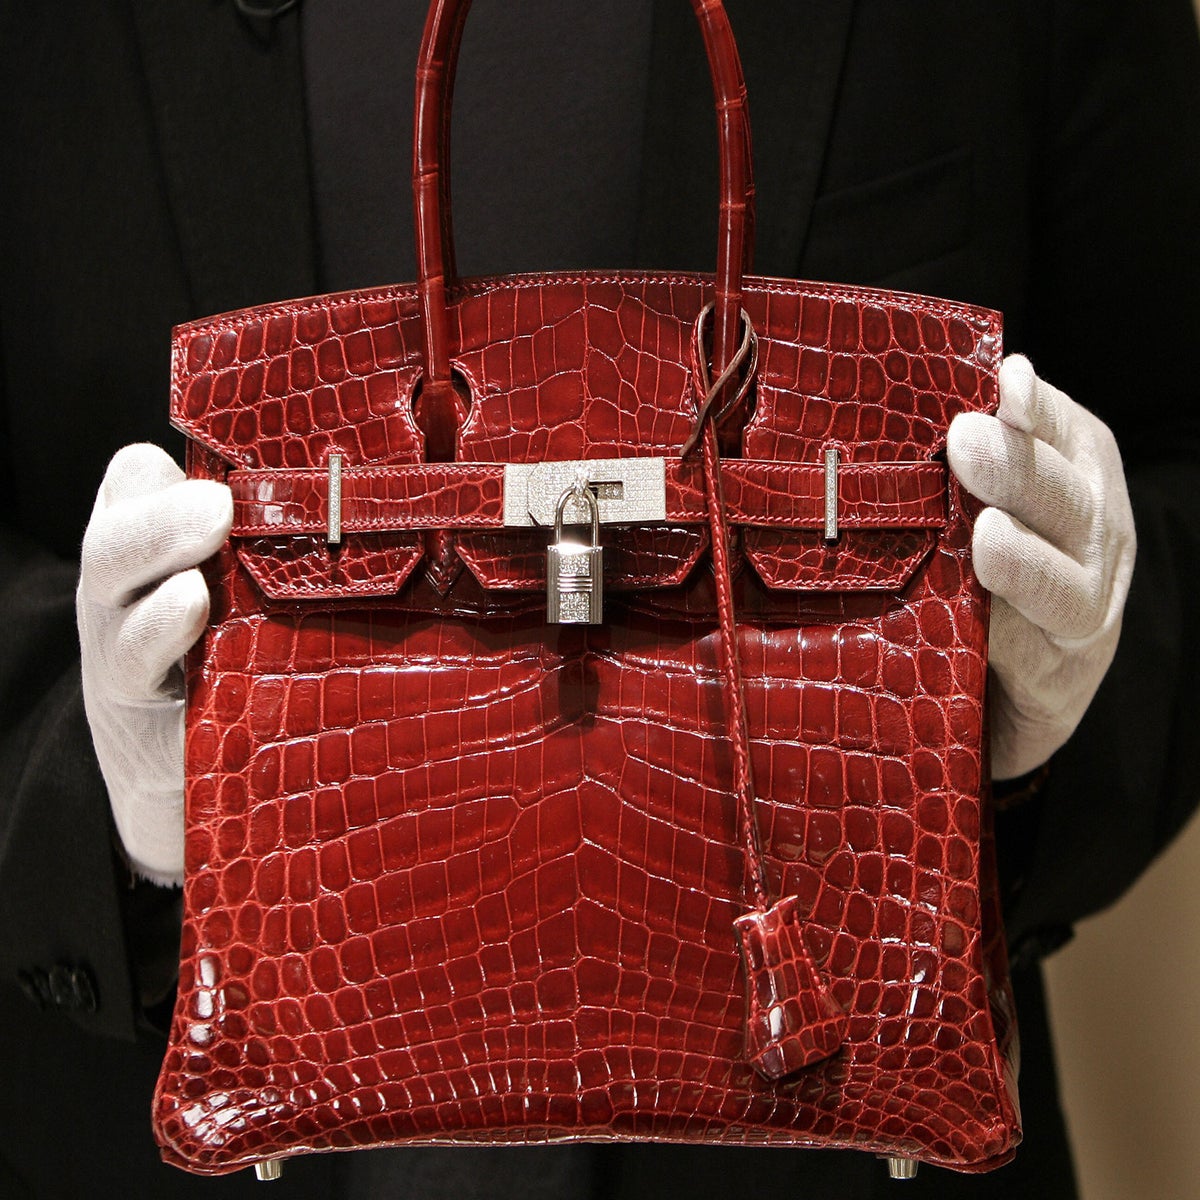 The 82 Styles of Hermès Handbags ~ Better Investment than the Stock Market?